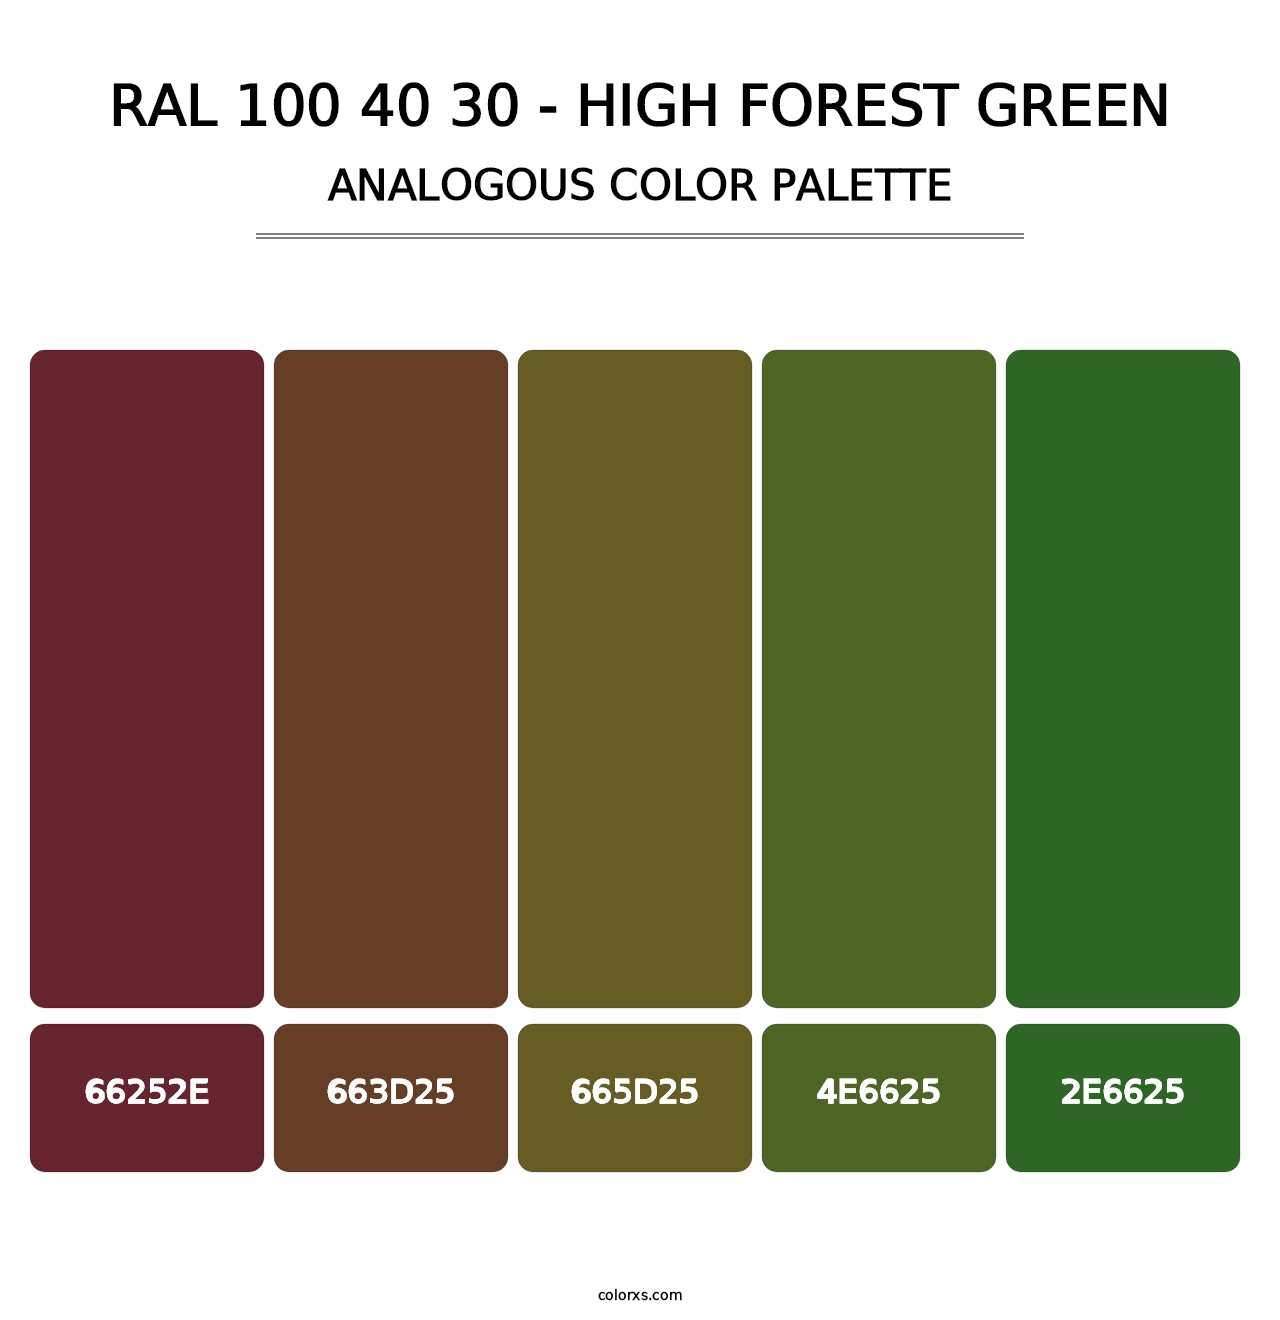 RAL 100 40 30 - High Forest Green - Analogous Color Palette